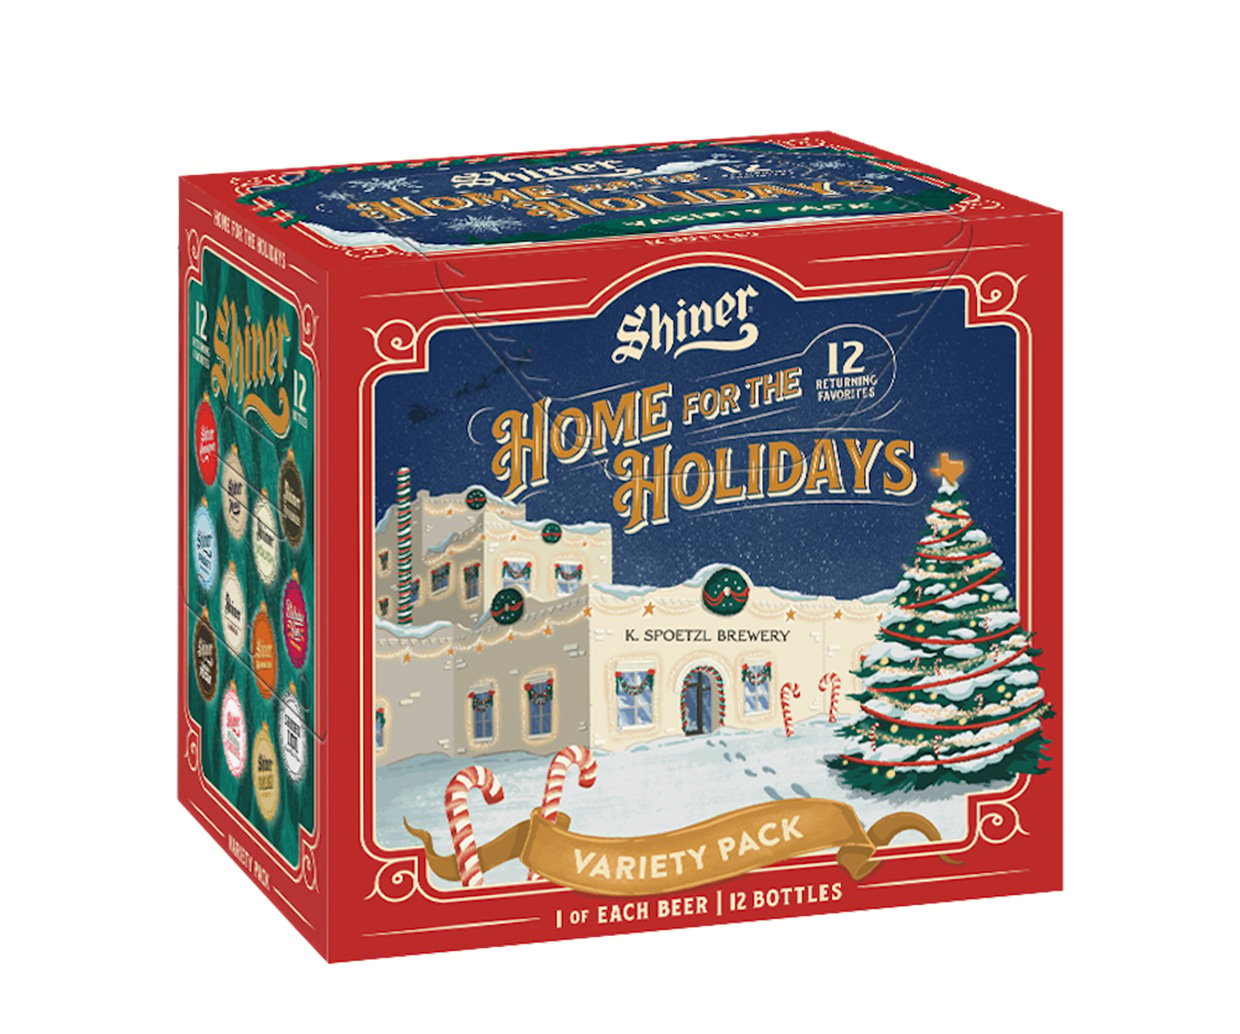 Shiner Beer Home for the Holidays Variety Pack